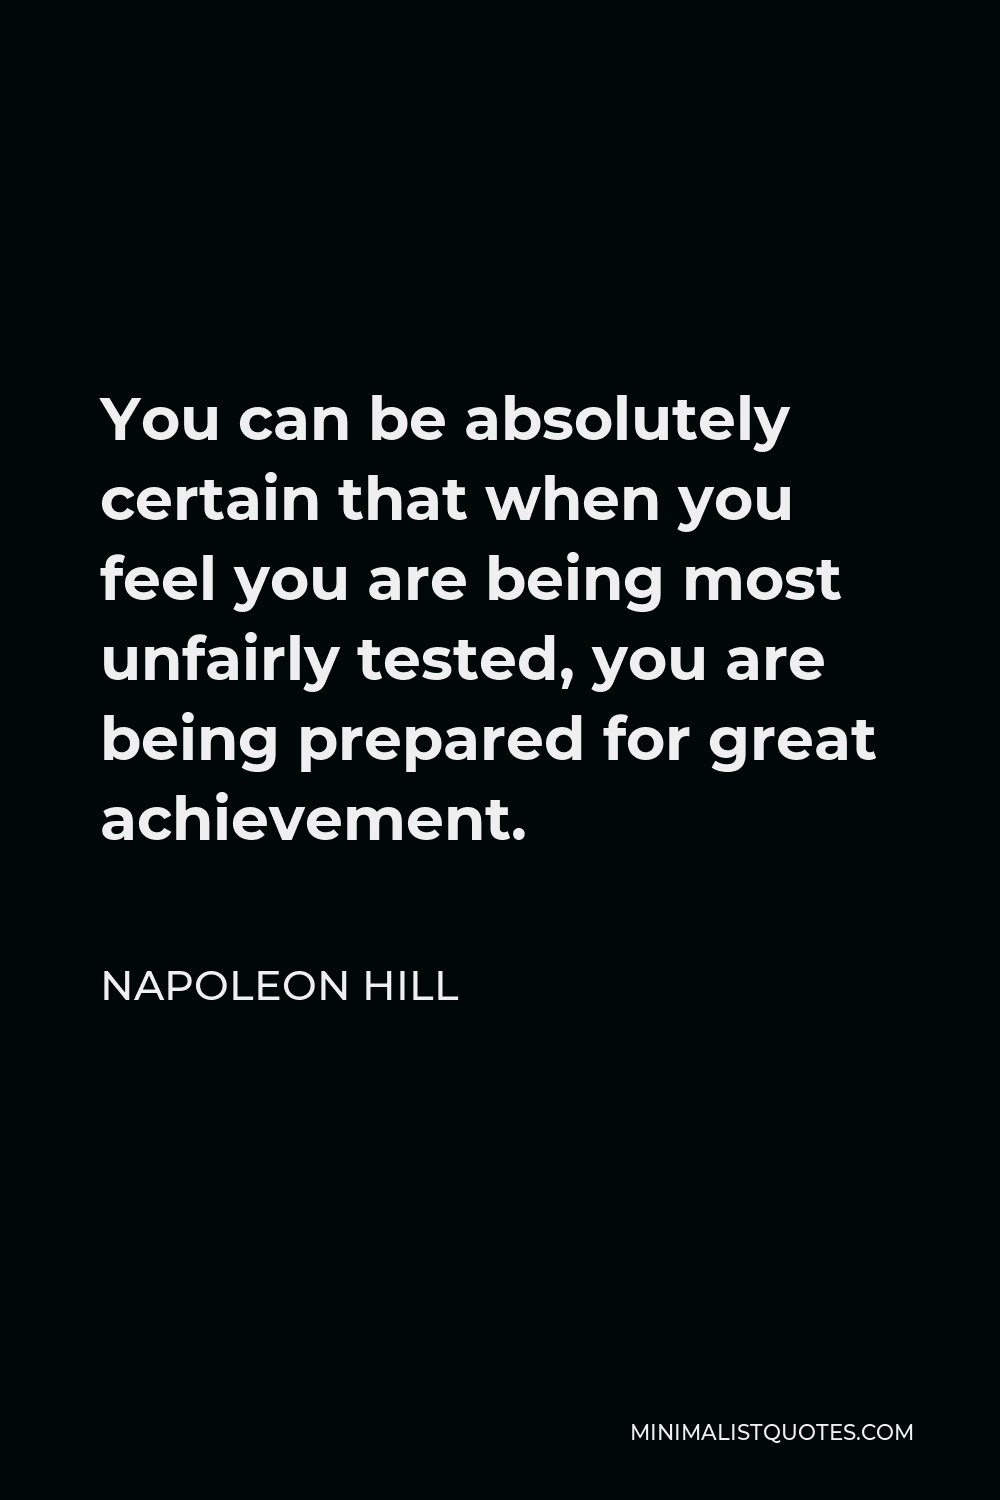 Napoleon Hill Quote - You can be absolutely certain that when you feel you are being most unfairly tested, you are being prepared for great achievement.